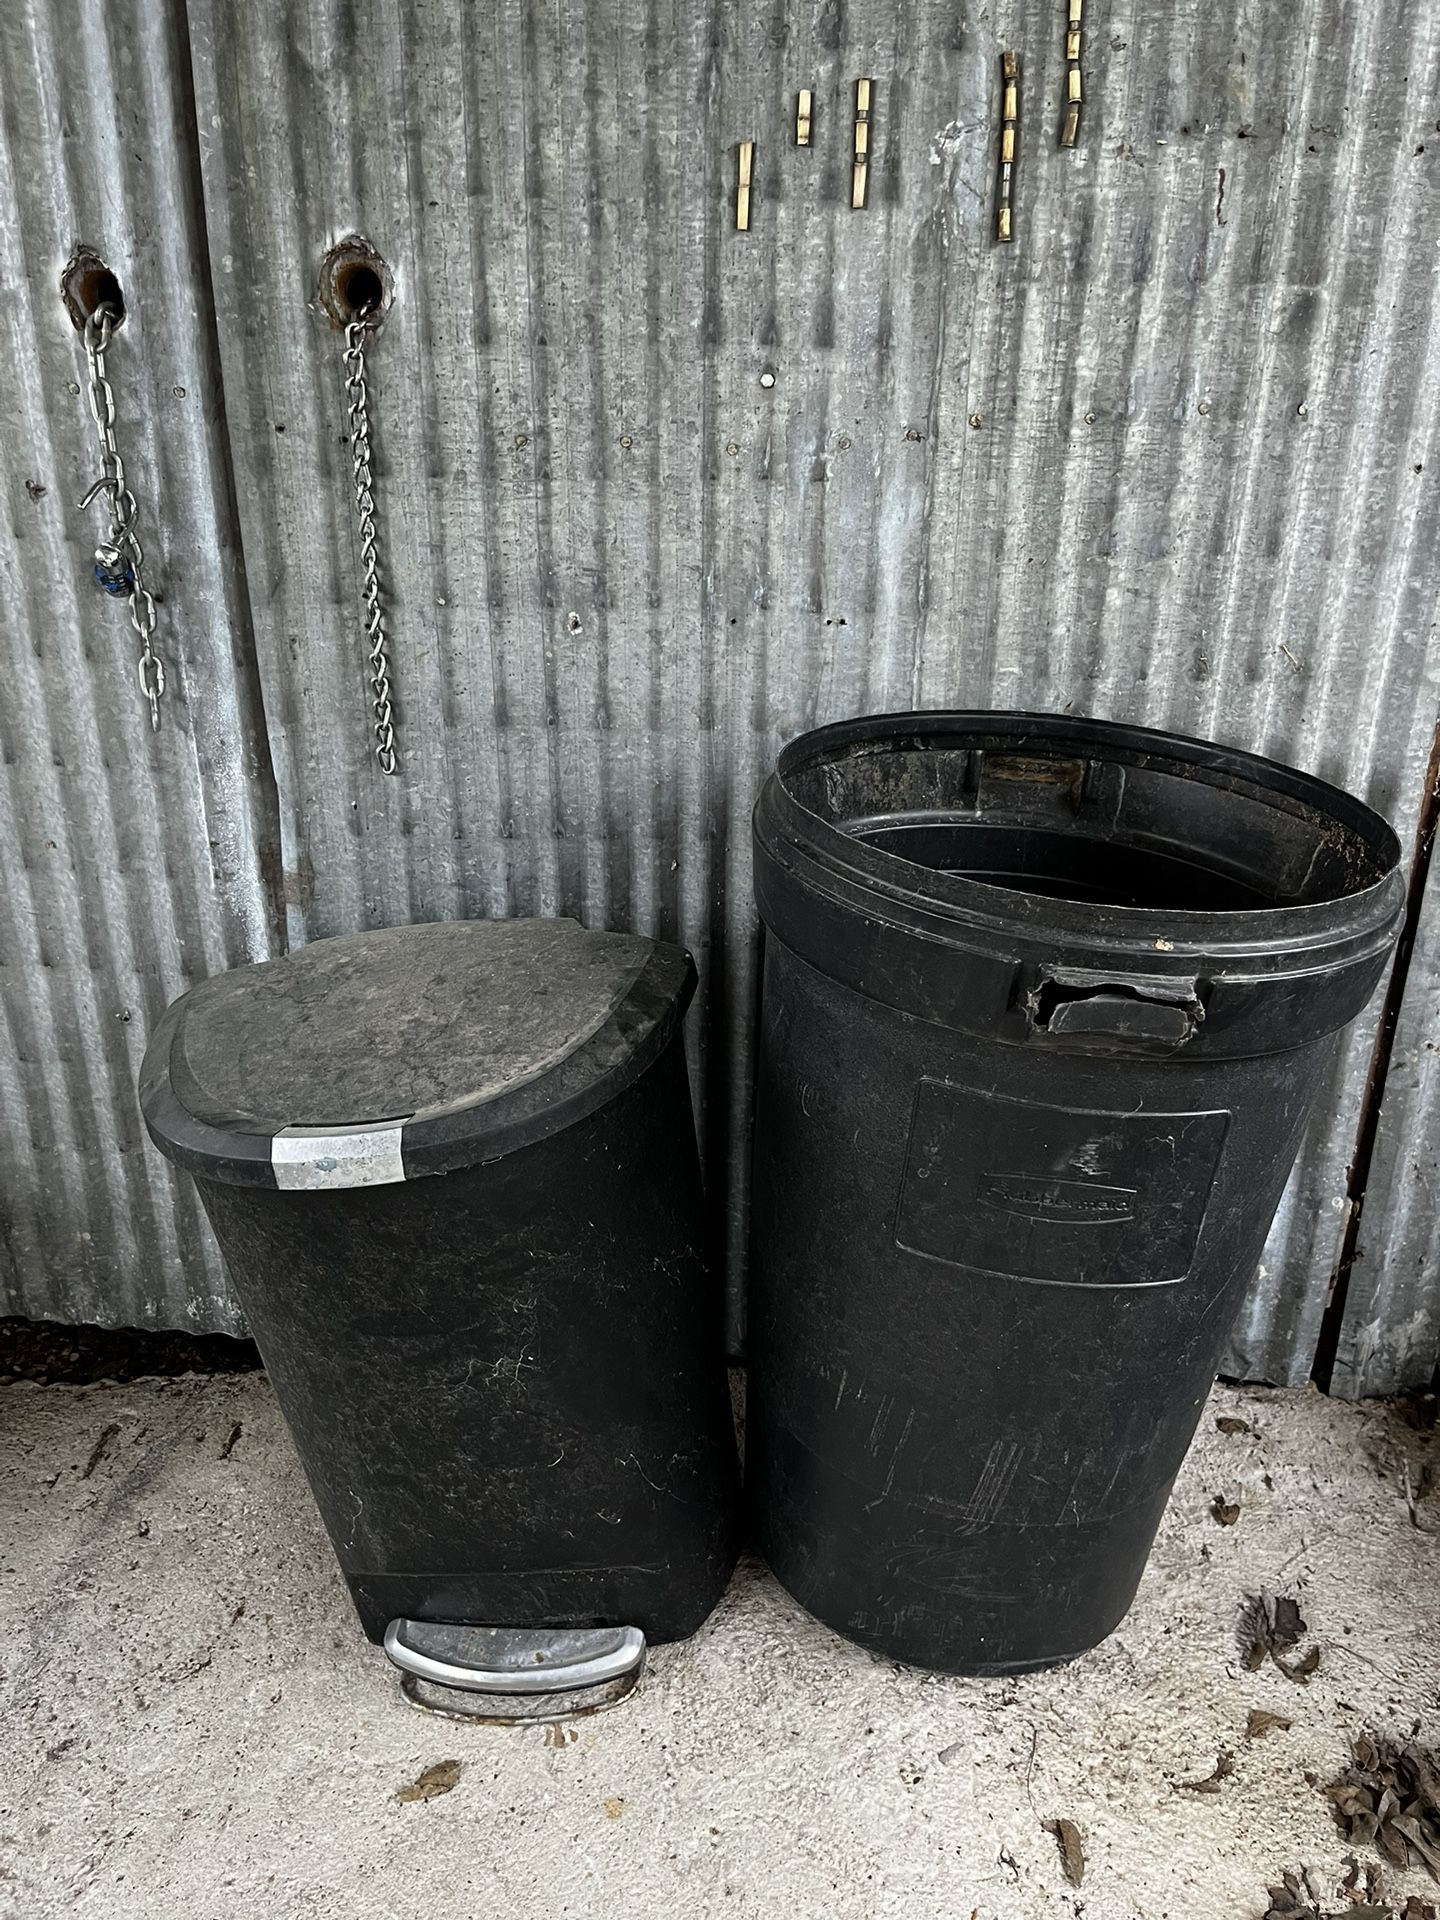 Two Mid-size Trash Cans 